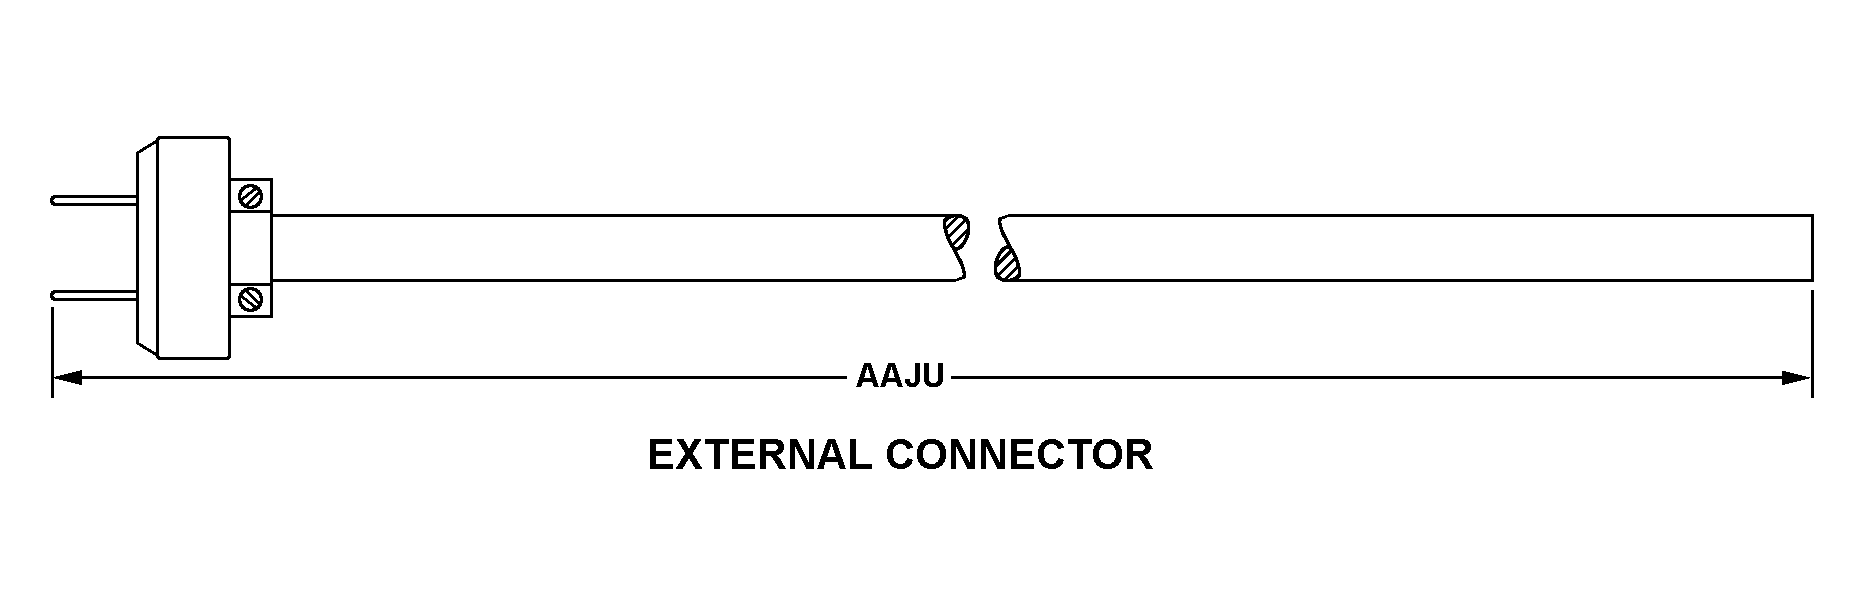 EXTERNAL CONNECTOR style nsn 6150-01-364-9611